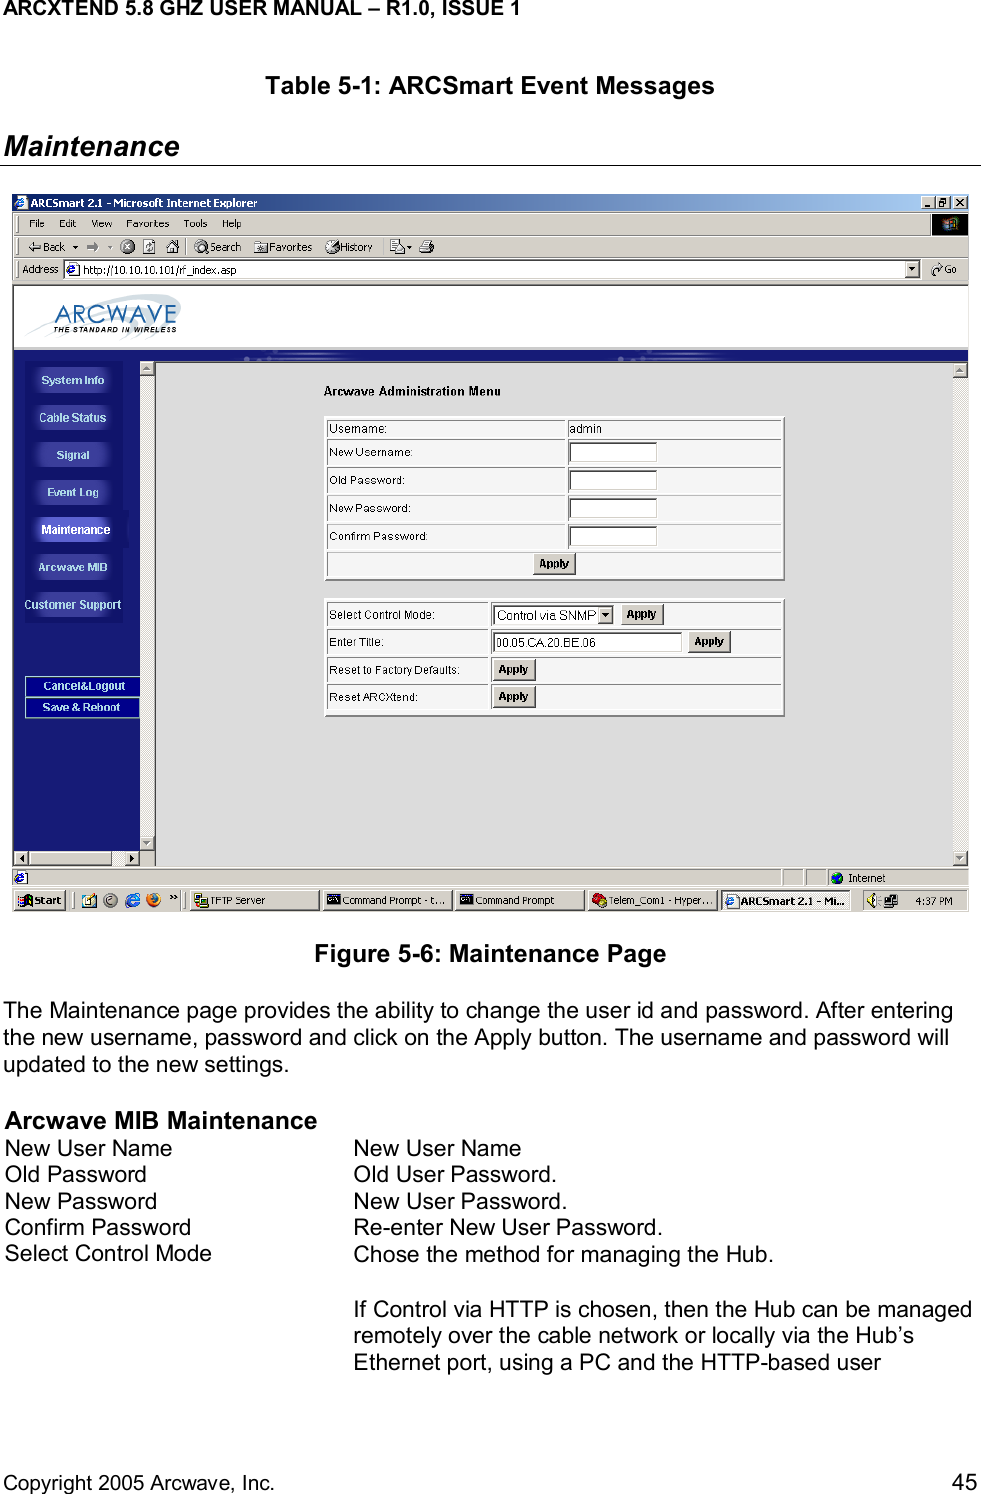 ARCXTEND 5.8 GHZ USER MANUAL – R1.0, ISSUE 1  Copyright 2005 Arcwave, Inc.    45 Table 5-1: ARCSmart Event Messages Maintenance  Figure 5-6: Maintenance Page The Maintenance page provides the ability to change the user id and password. After entering the new username, password and click on the Apply button. The username and password will updated to the new settings.   Arcwave MIB Maintenance New User Name  New User Name Old Password  Old User Password.  New Password  New User Password. Confirm Password  Re-enter New User Password. Select Control Mode  Chose the method for managing the Hub.  If Control via HTTP is chosen, then the Hub can be managed remotely over the cable network or locally via the Hub’s Ethernet port, using a PC and the HTTP-based user 